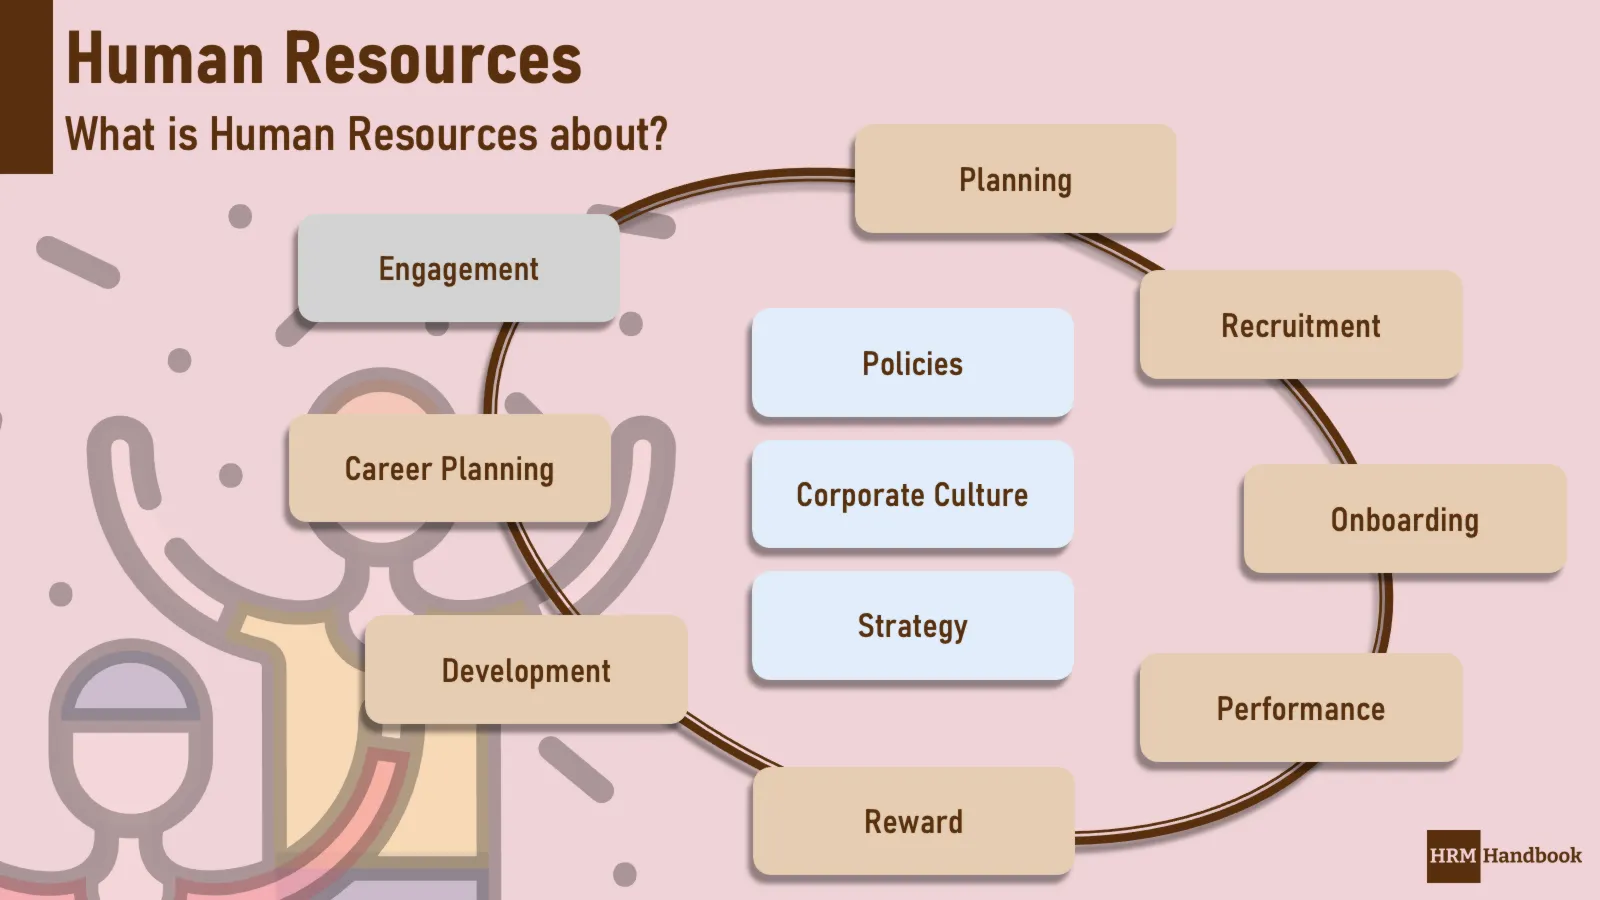 Human Resources: What is it about? What are the key responsibilities of Human Resources?